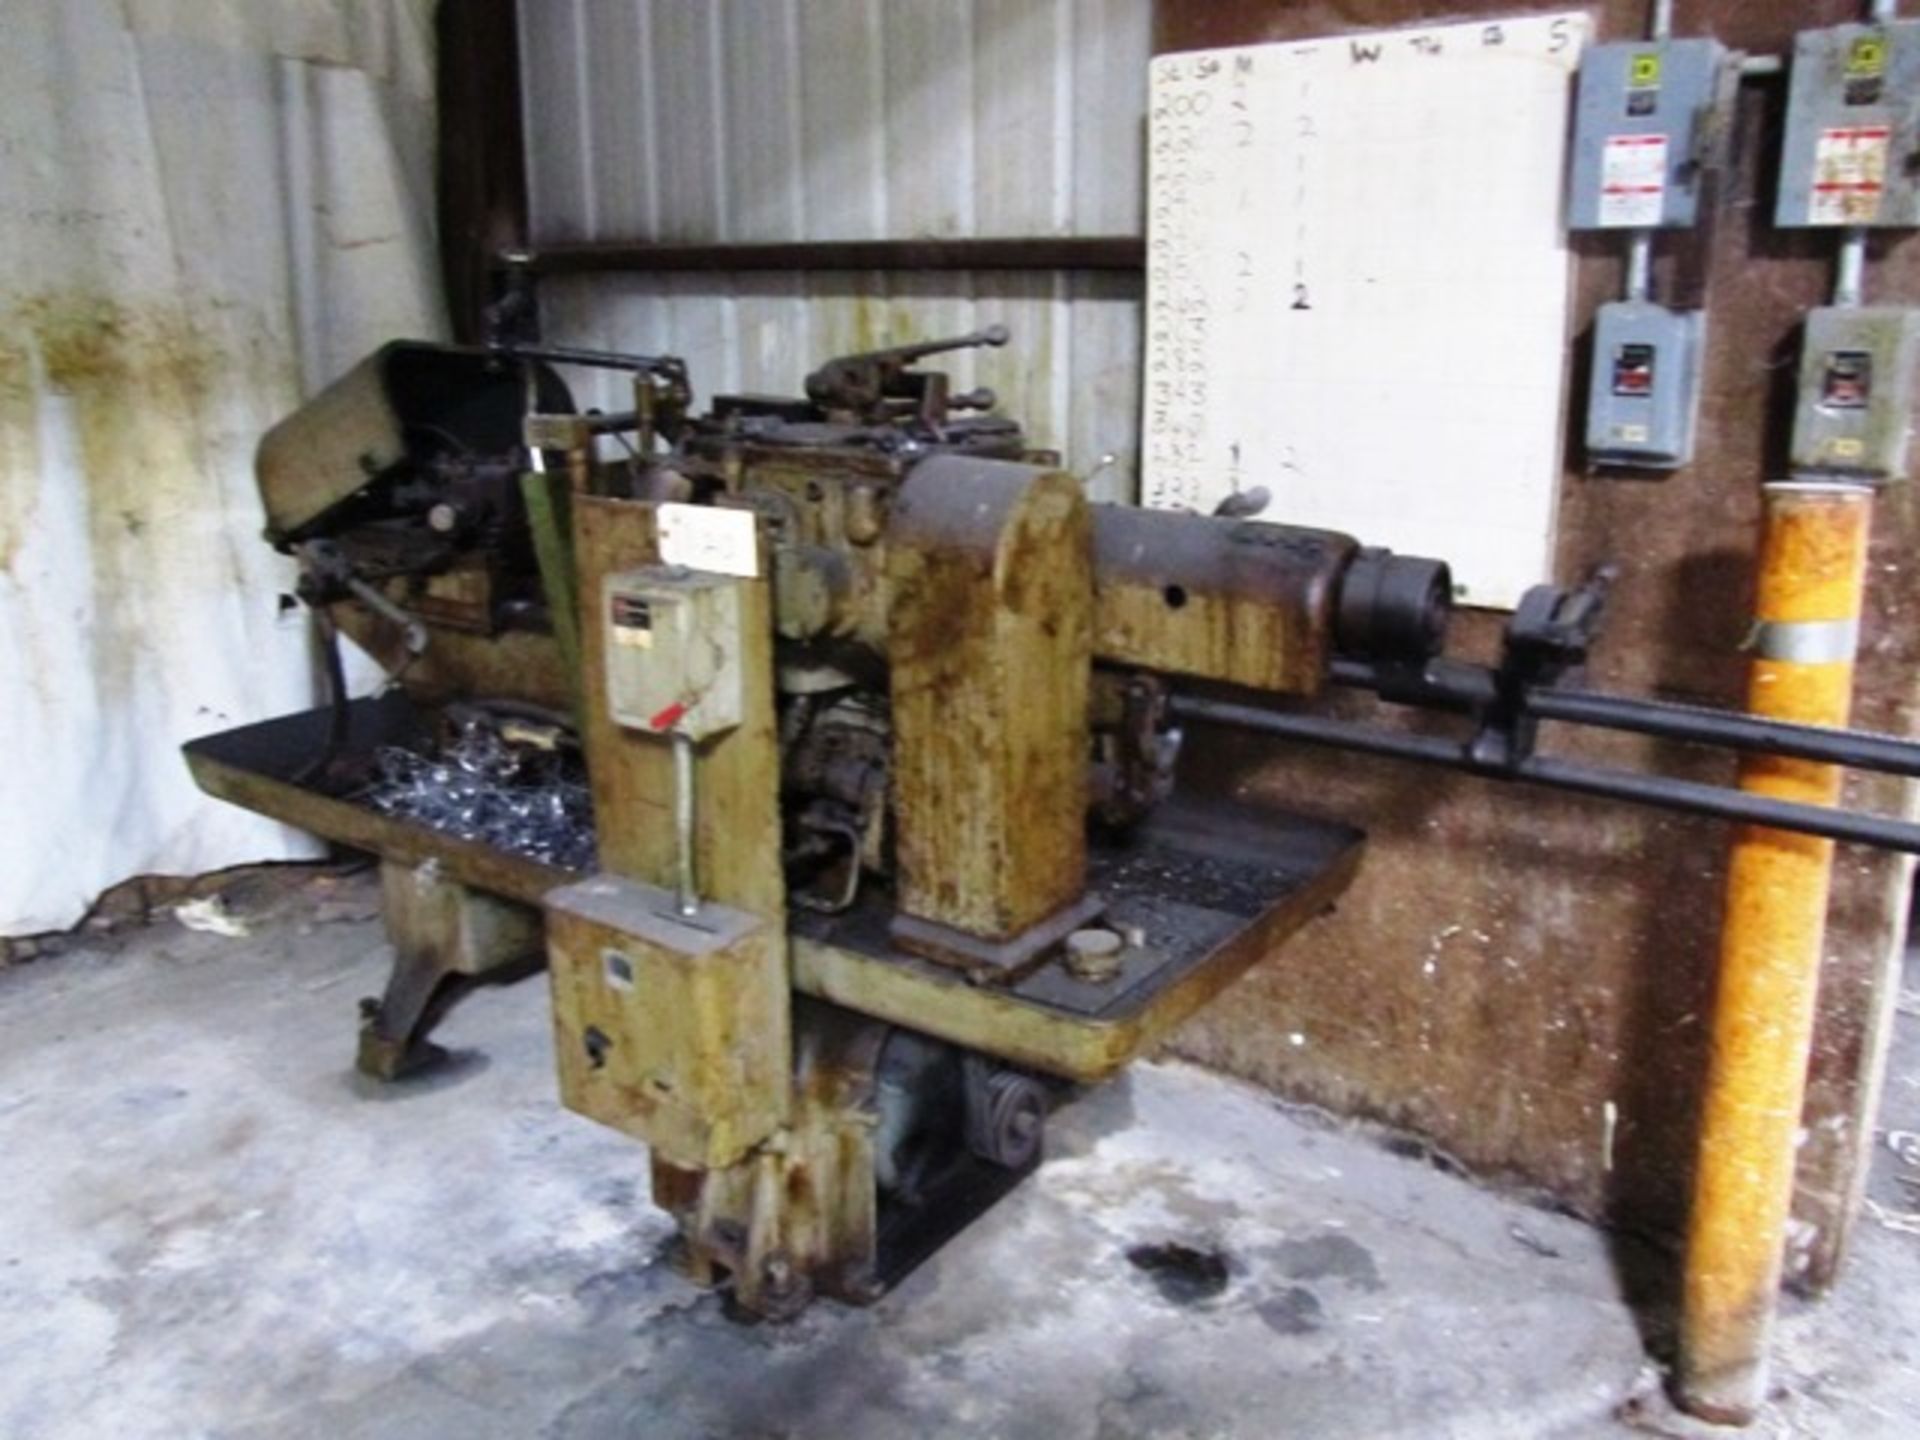 Warner & Swasey No.8 Turret Lathe with 6 Position Turret, 2'' Bore